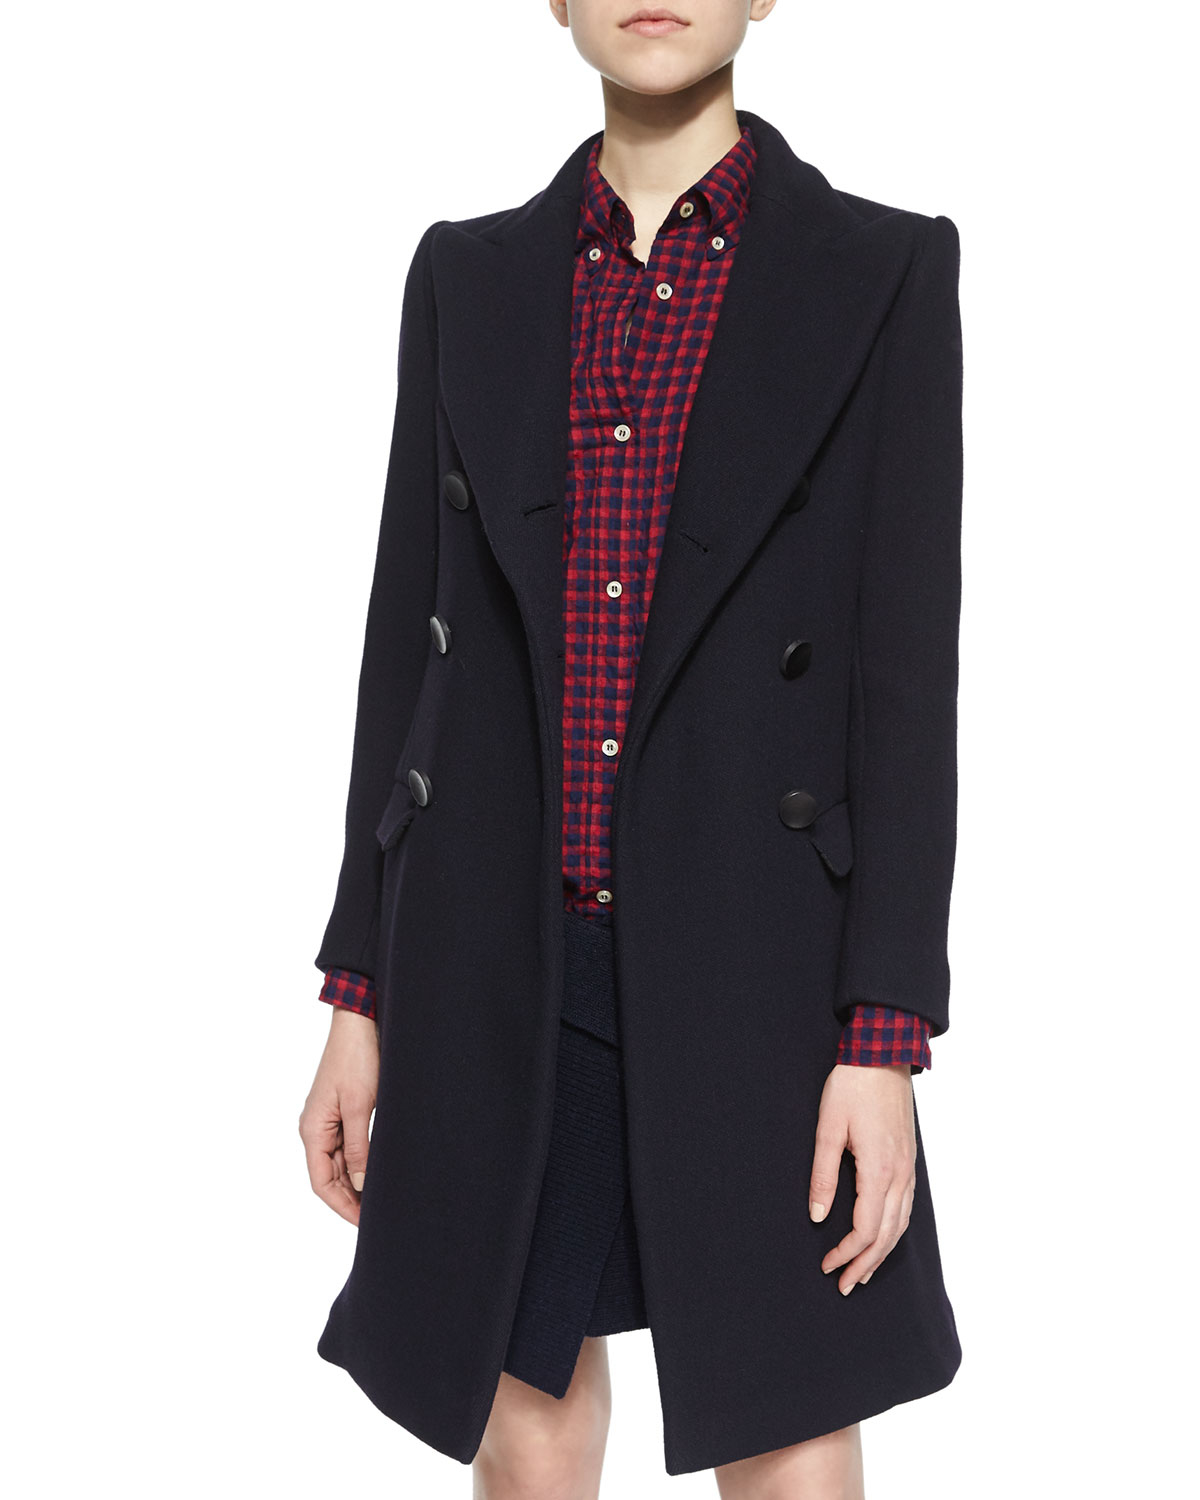 Étoile Isabel Marant Carey Double-breasted Wool-blend Coat in Black - Lyst